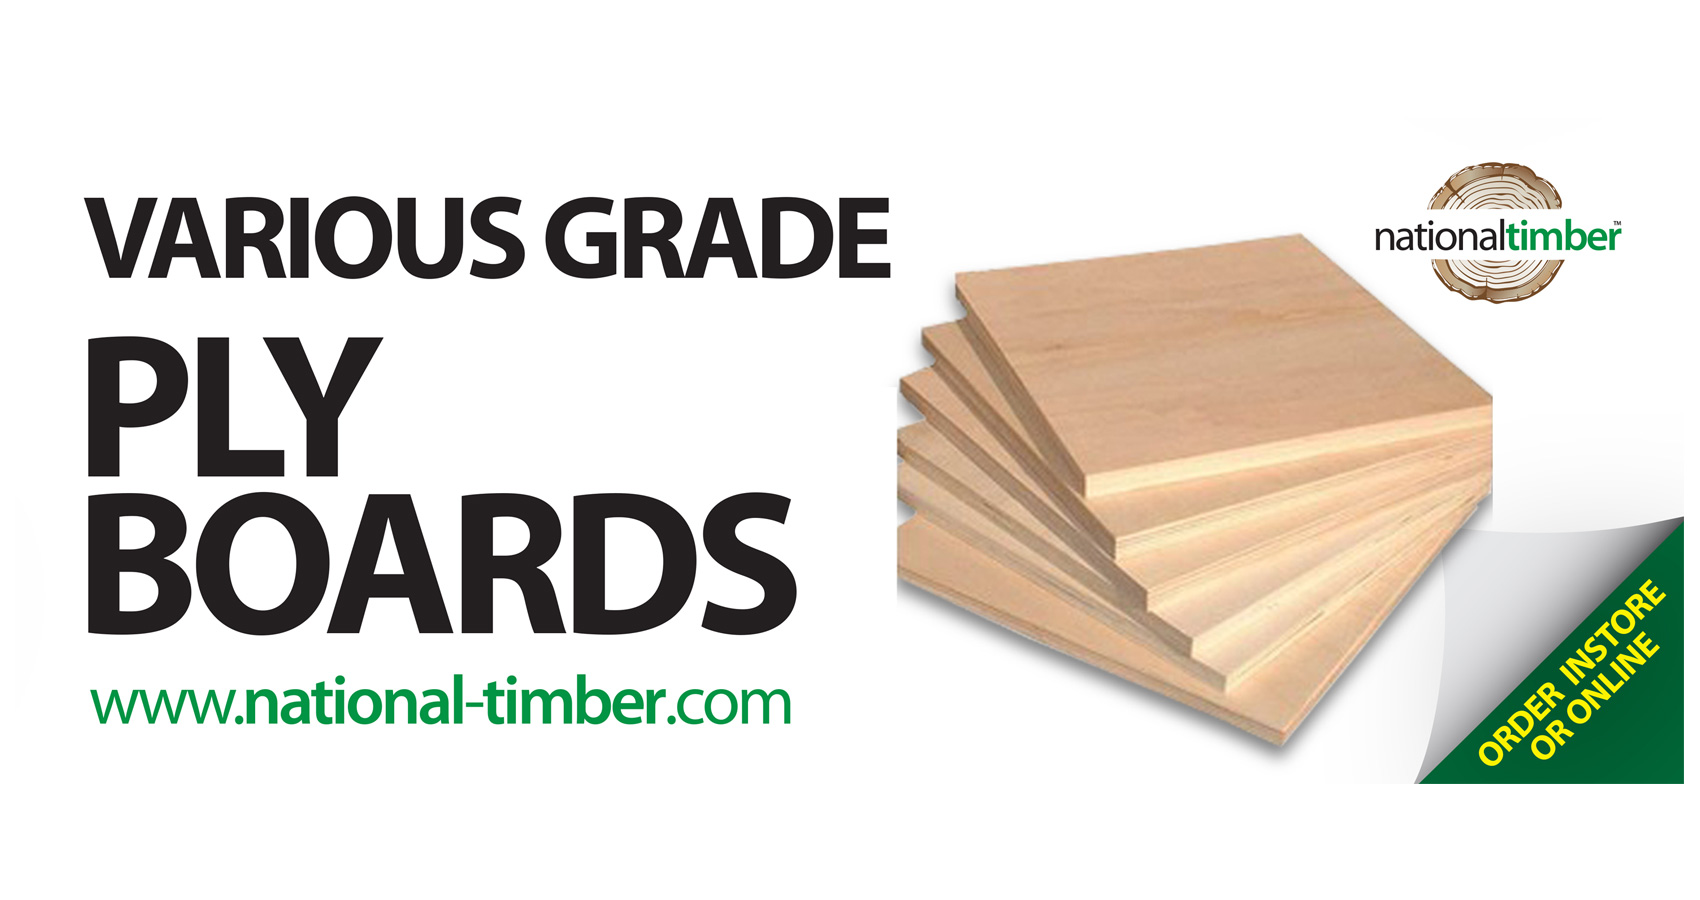 Plyboards